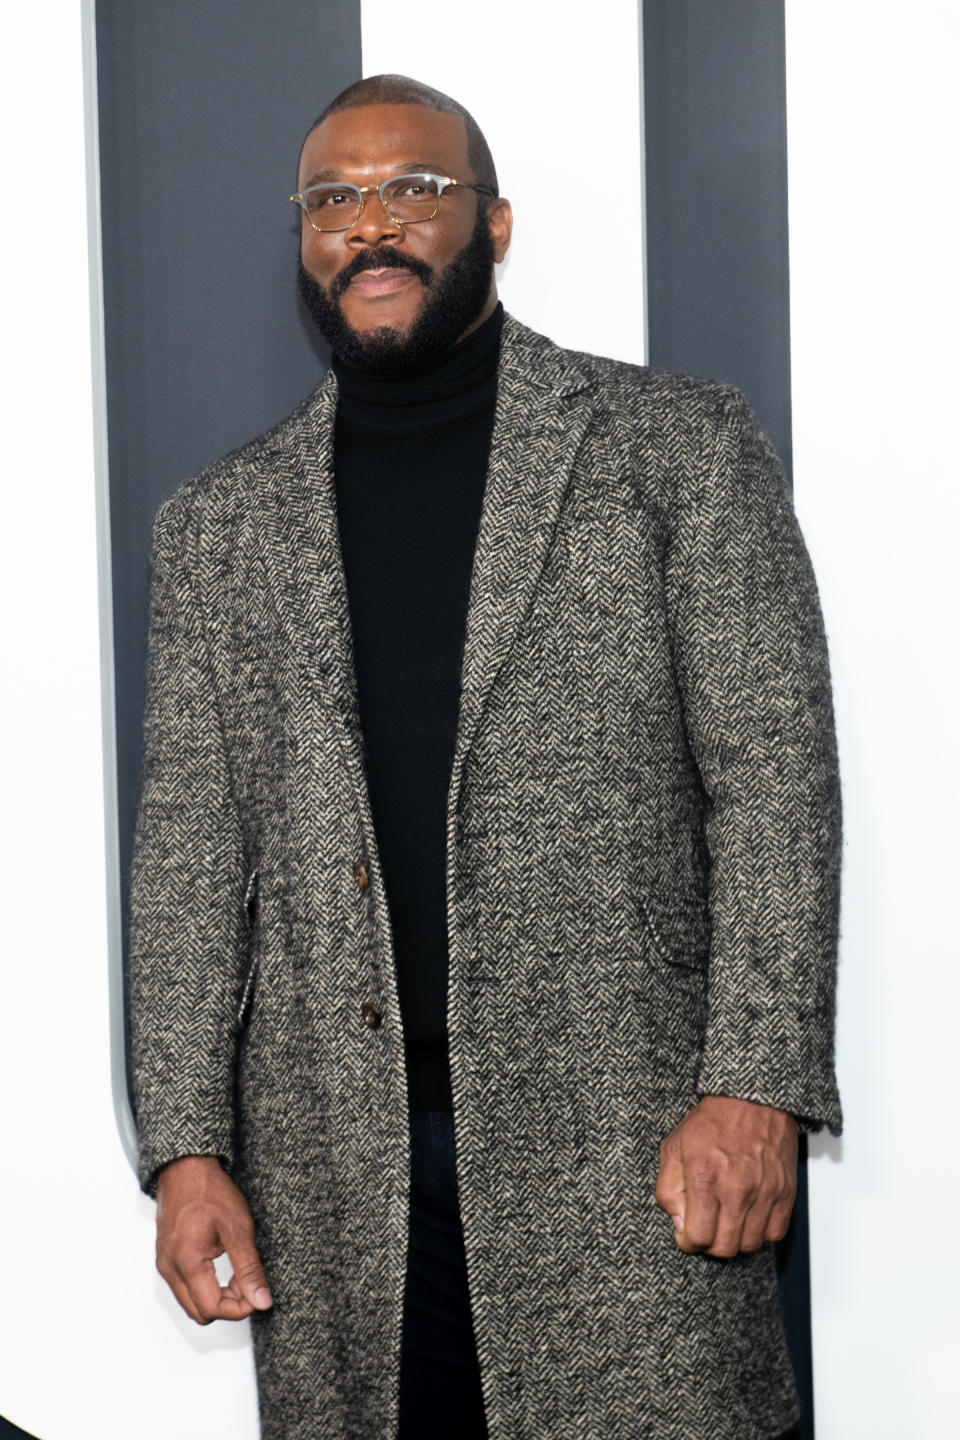 Tyler Perry at the New York City premiere Of Netflix's "Don't Look Up" at Jazz at Lincoln Center on December 05, 2021